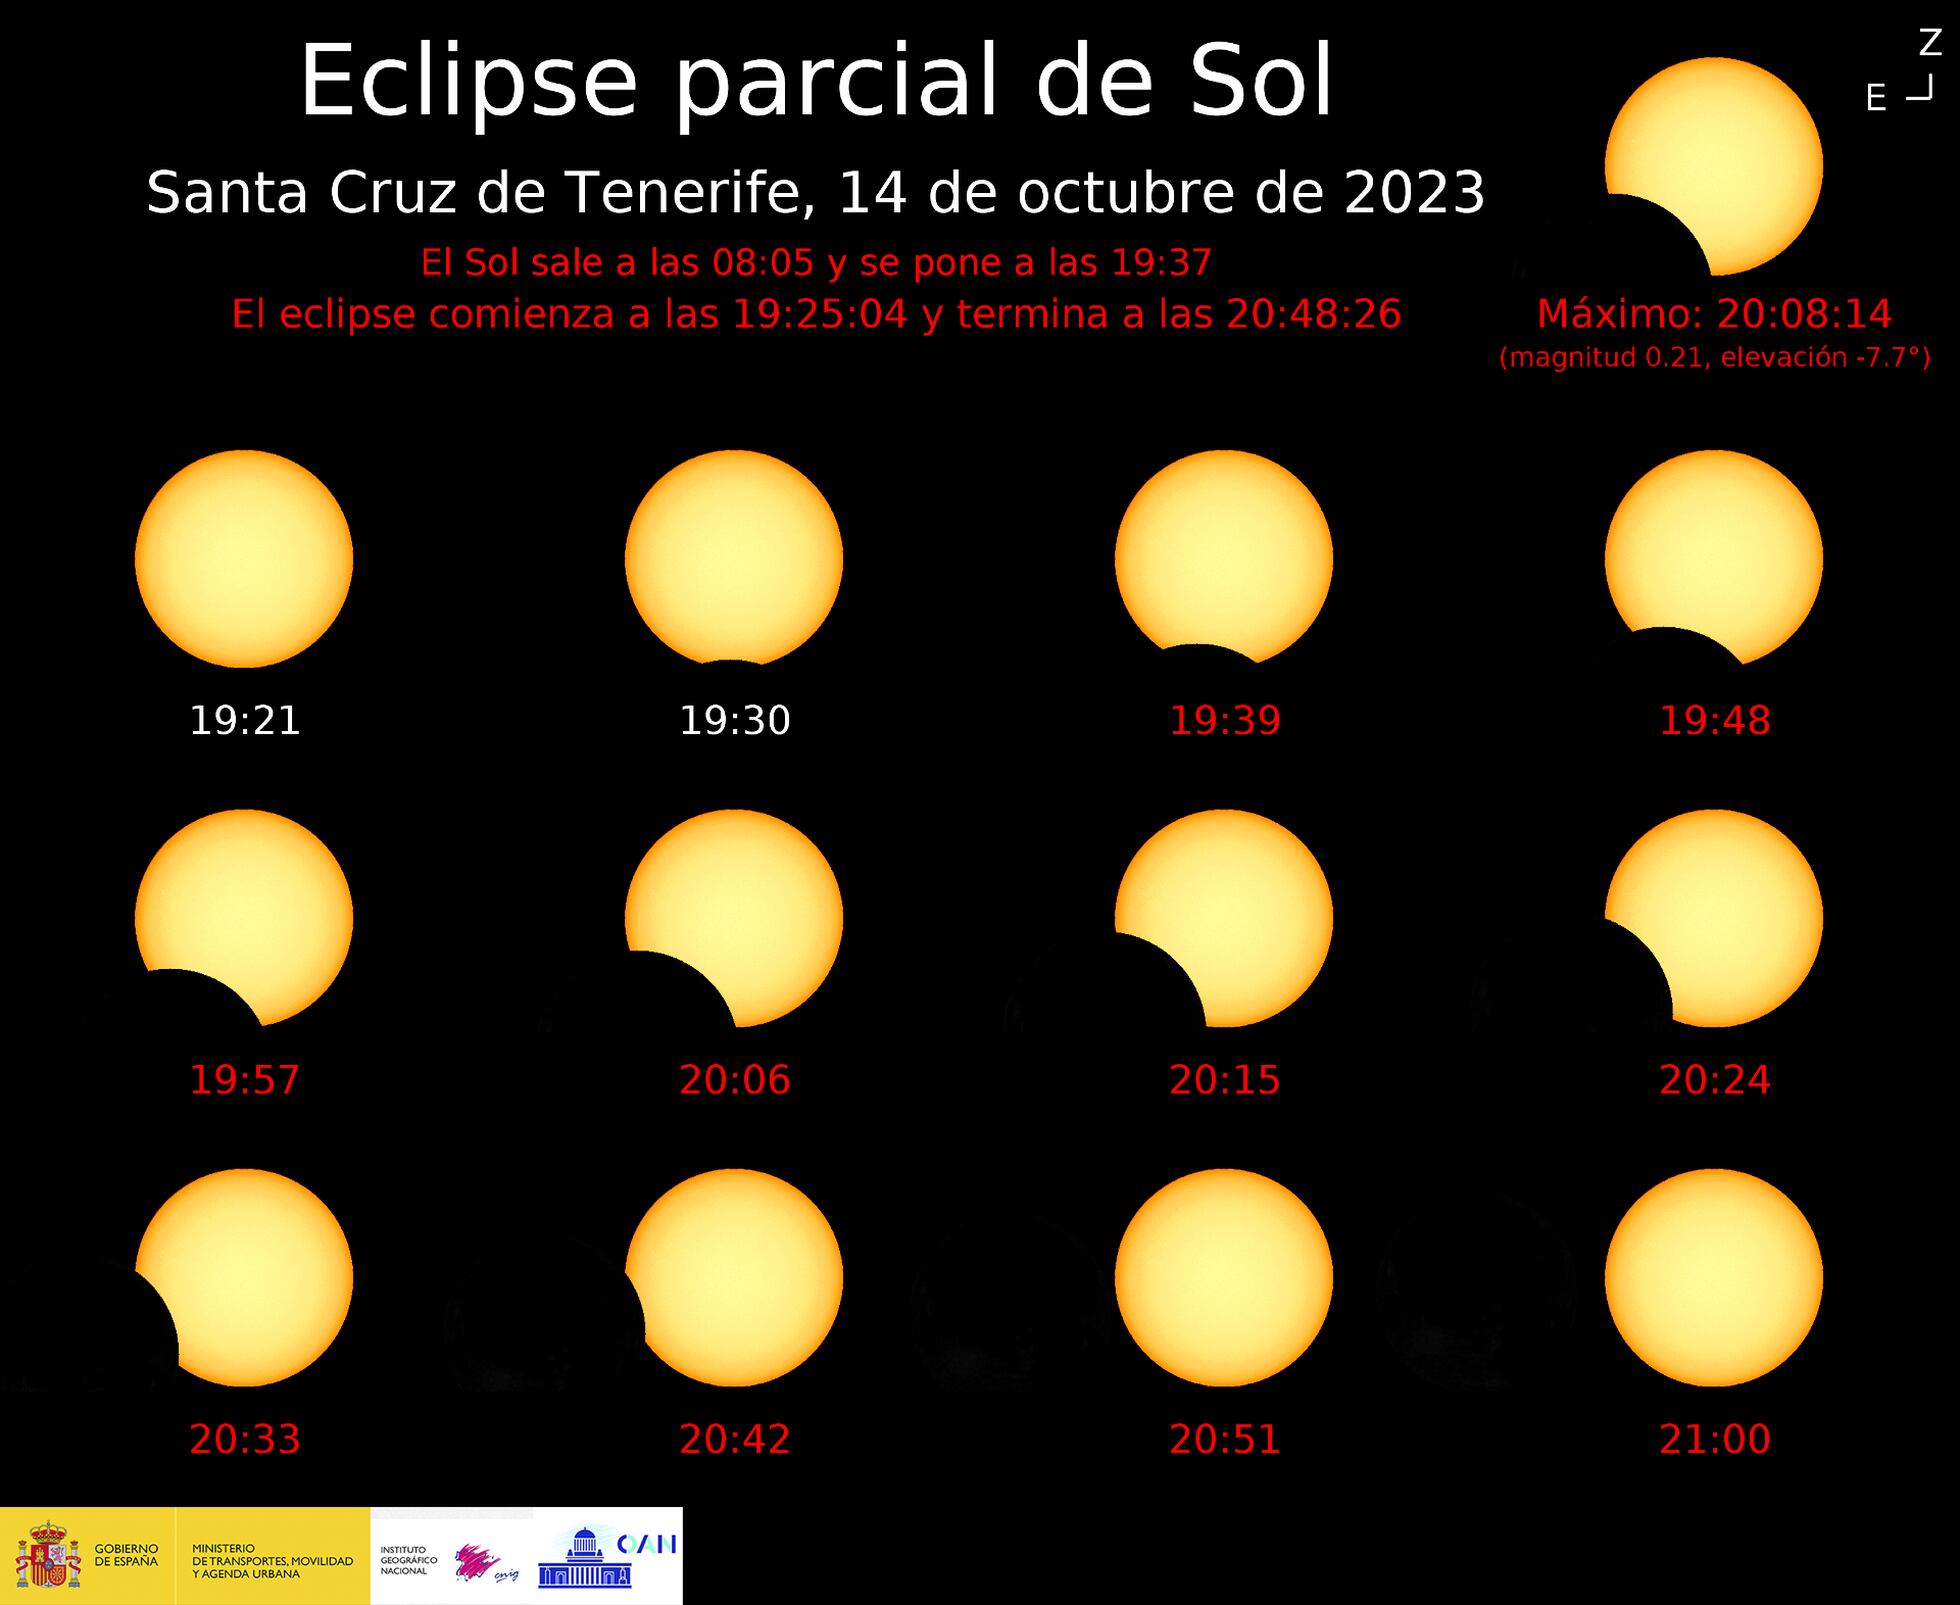 Annular solar eclipse in October the 'ring of fire' that crosses